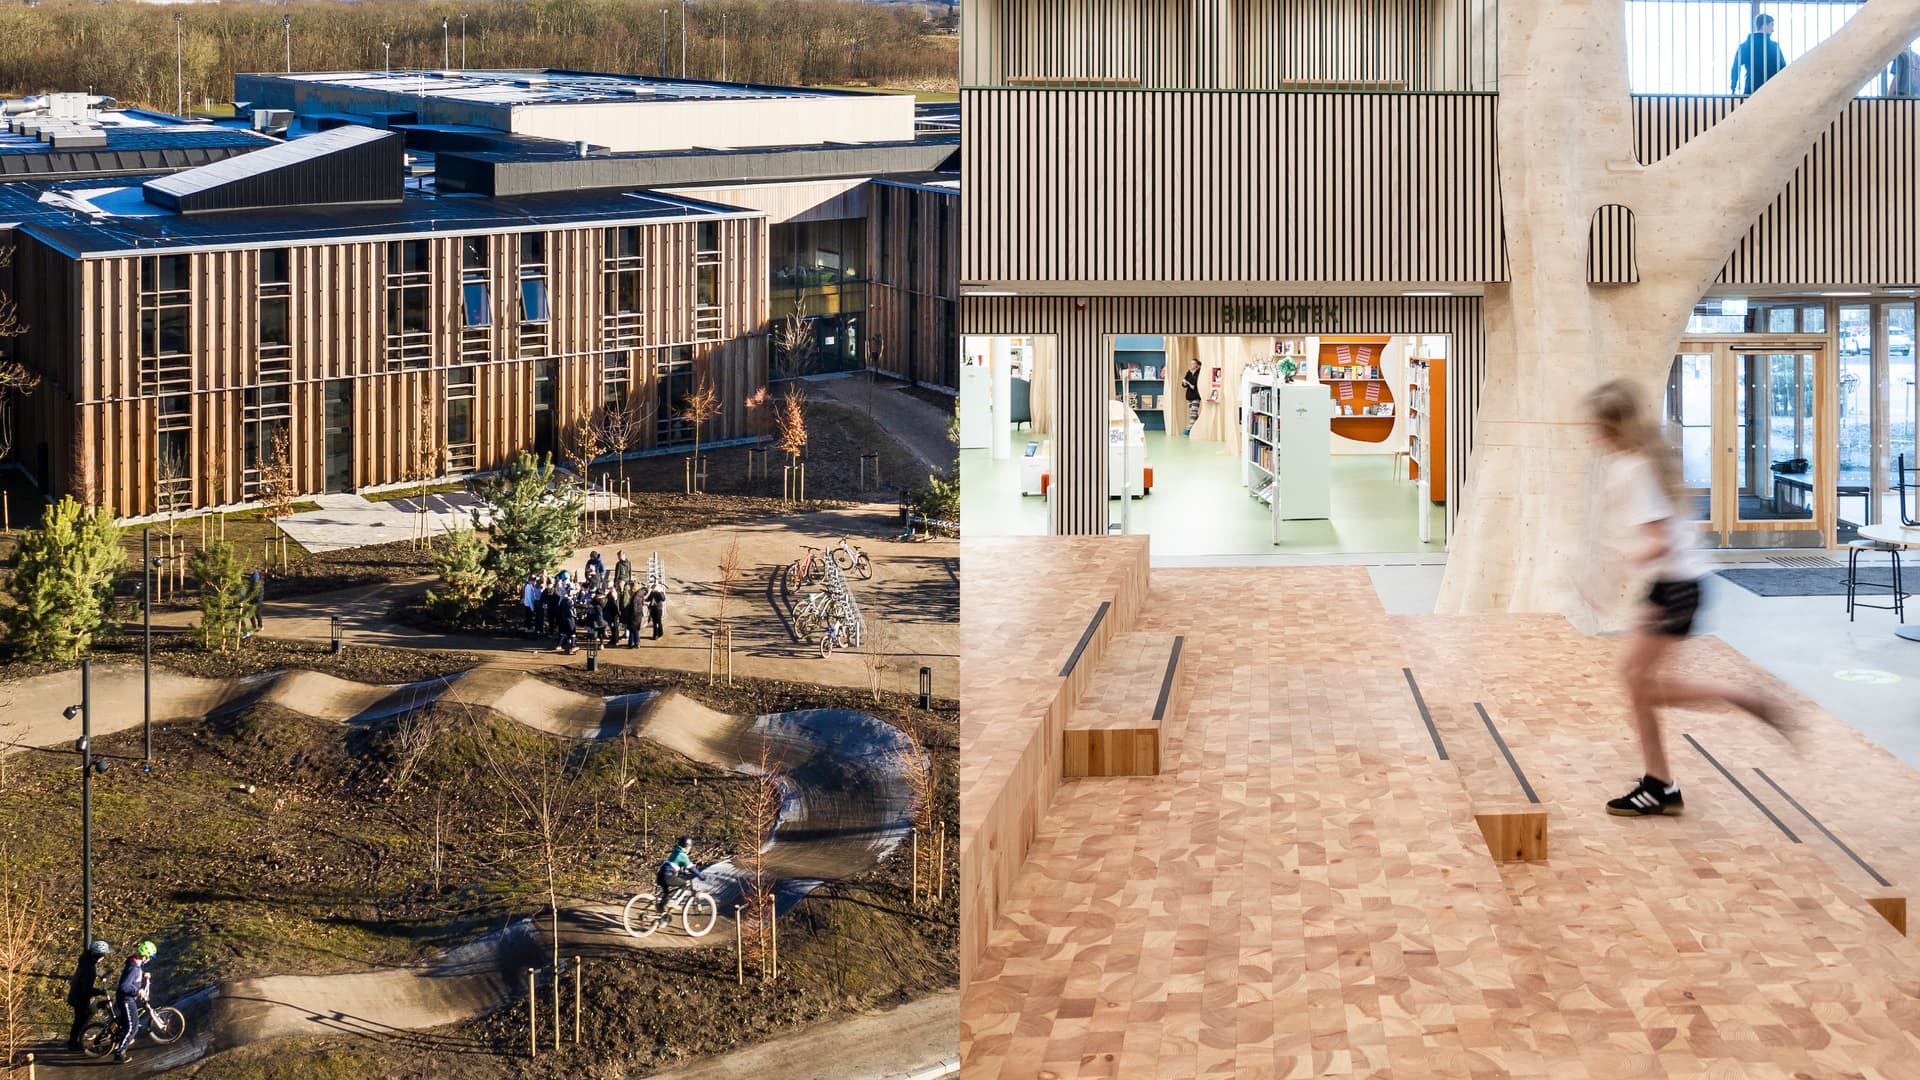 For Vrå Børne og Kulturhus, we conducted a pre-measurement that will, for example, give us insight into the effect of the new school on students' learning and well-beingl